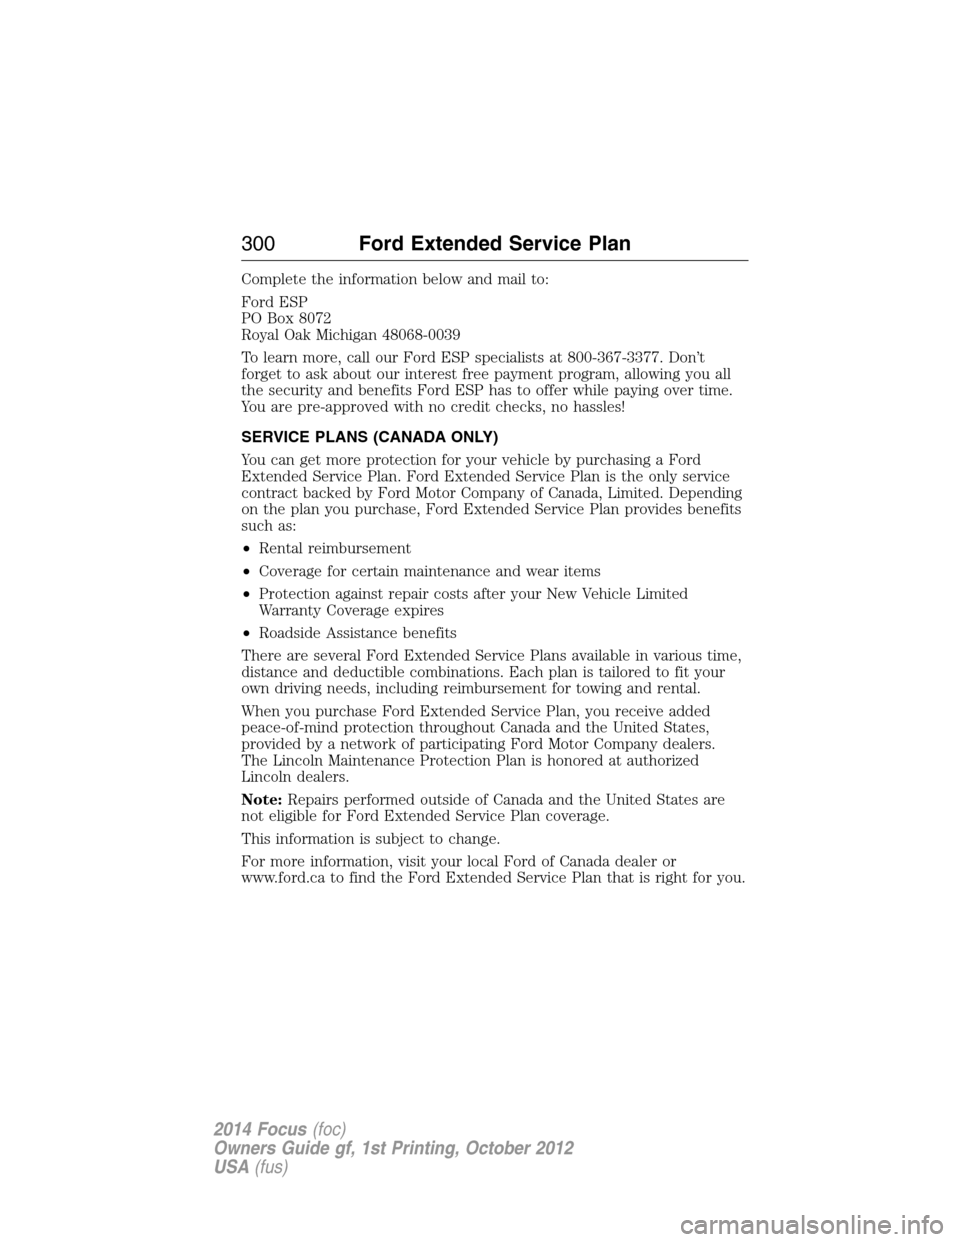 FORD FOCUS 2014 3.G Service Manual Complete the information below and mail to:
Ford ESP
PO Box 8072
Royal Oak Michigan 48068-0039
To learn more, call our Ford ESP specialists at 800-367-3377. Don’t
forget to ask about our interest fr